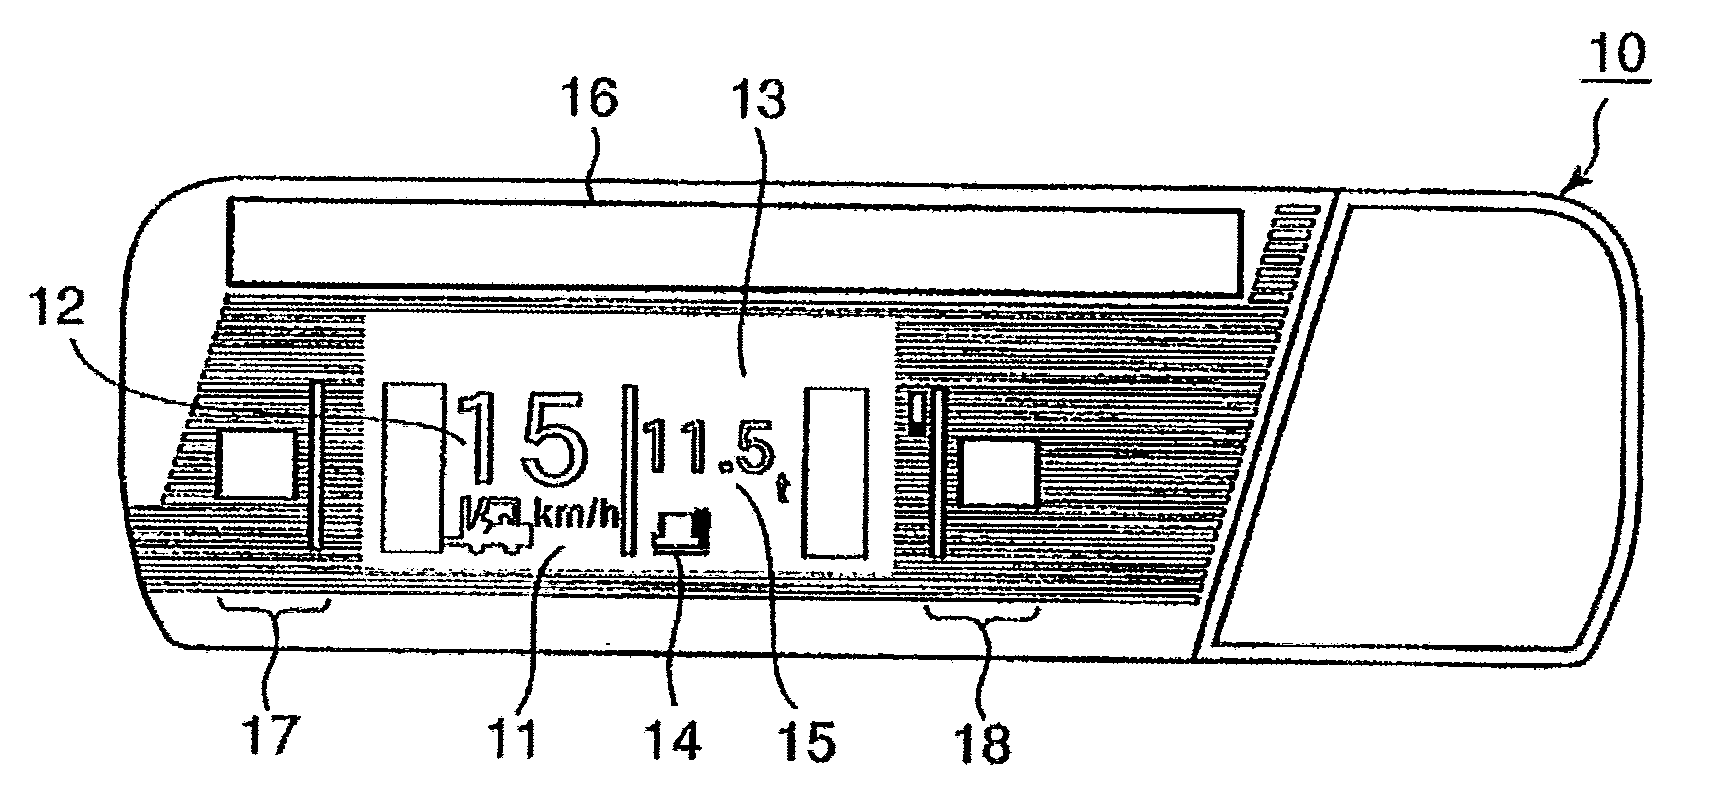 Display device for cargo-handling vehicles